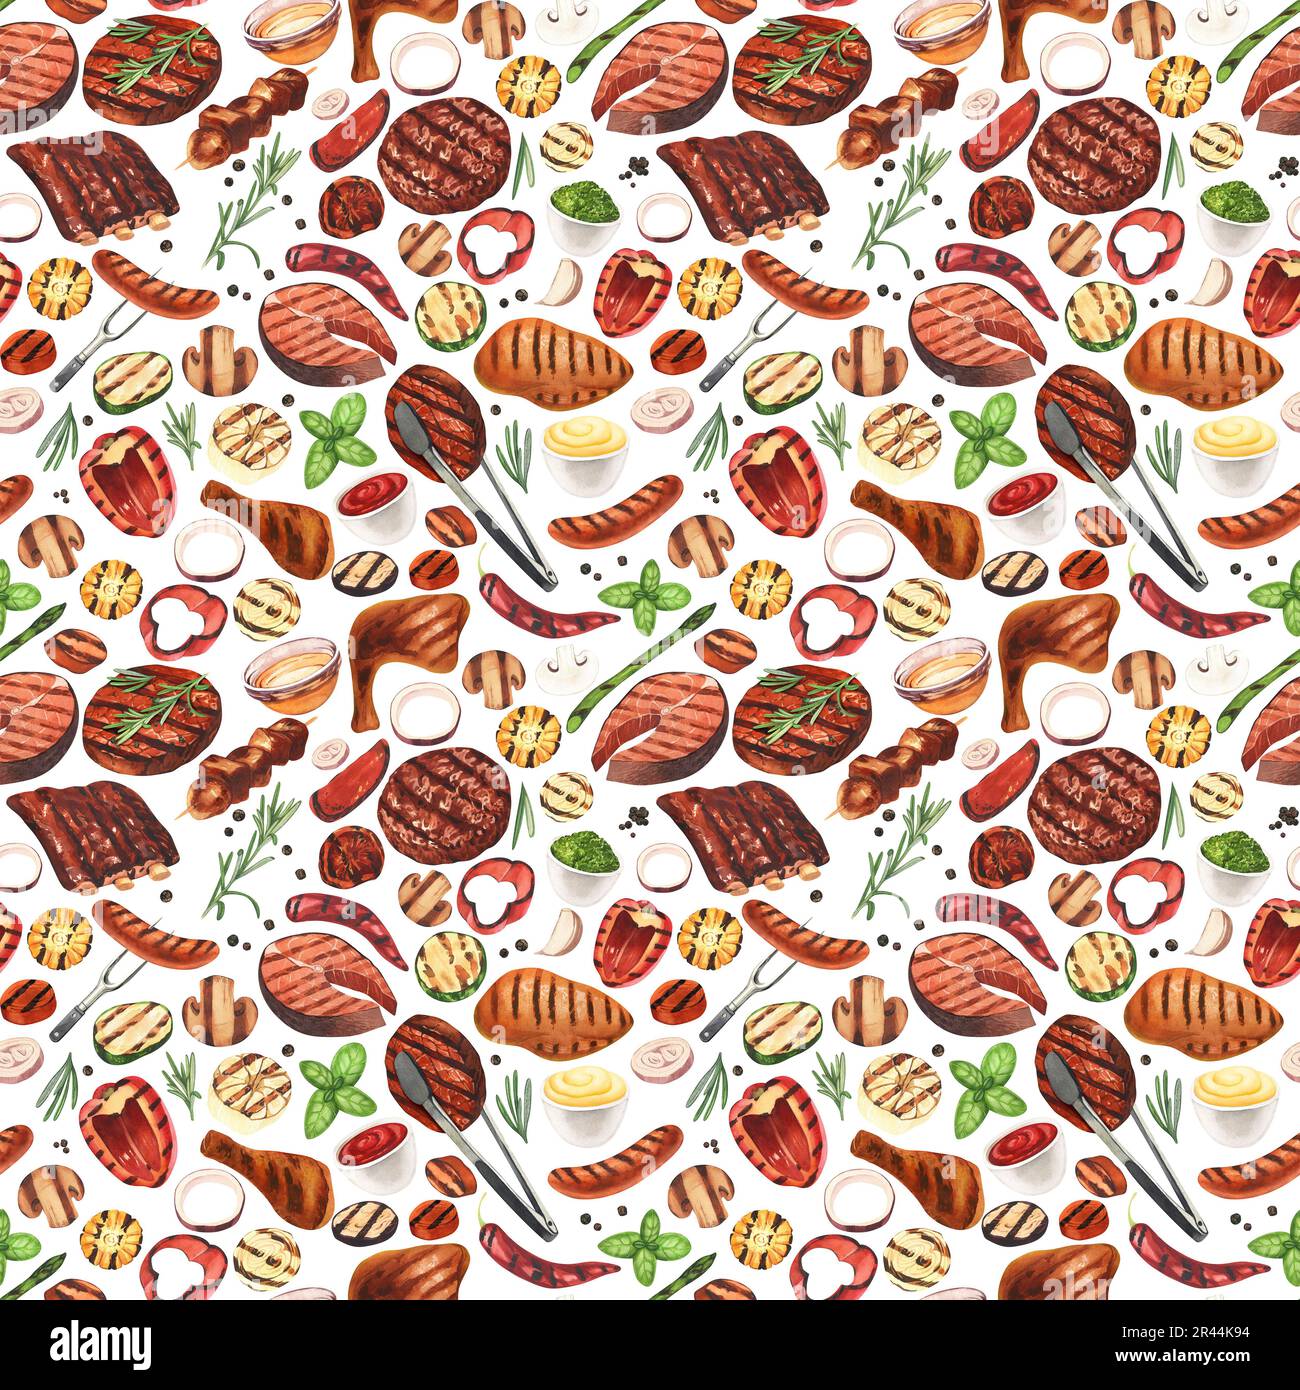 Grilled meat seamless patterns Stock Vector by ©olegtoka1967 123879682